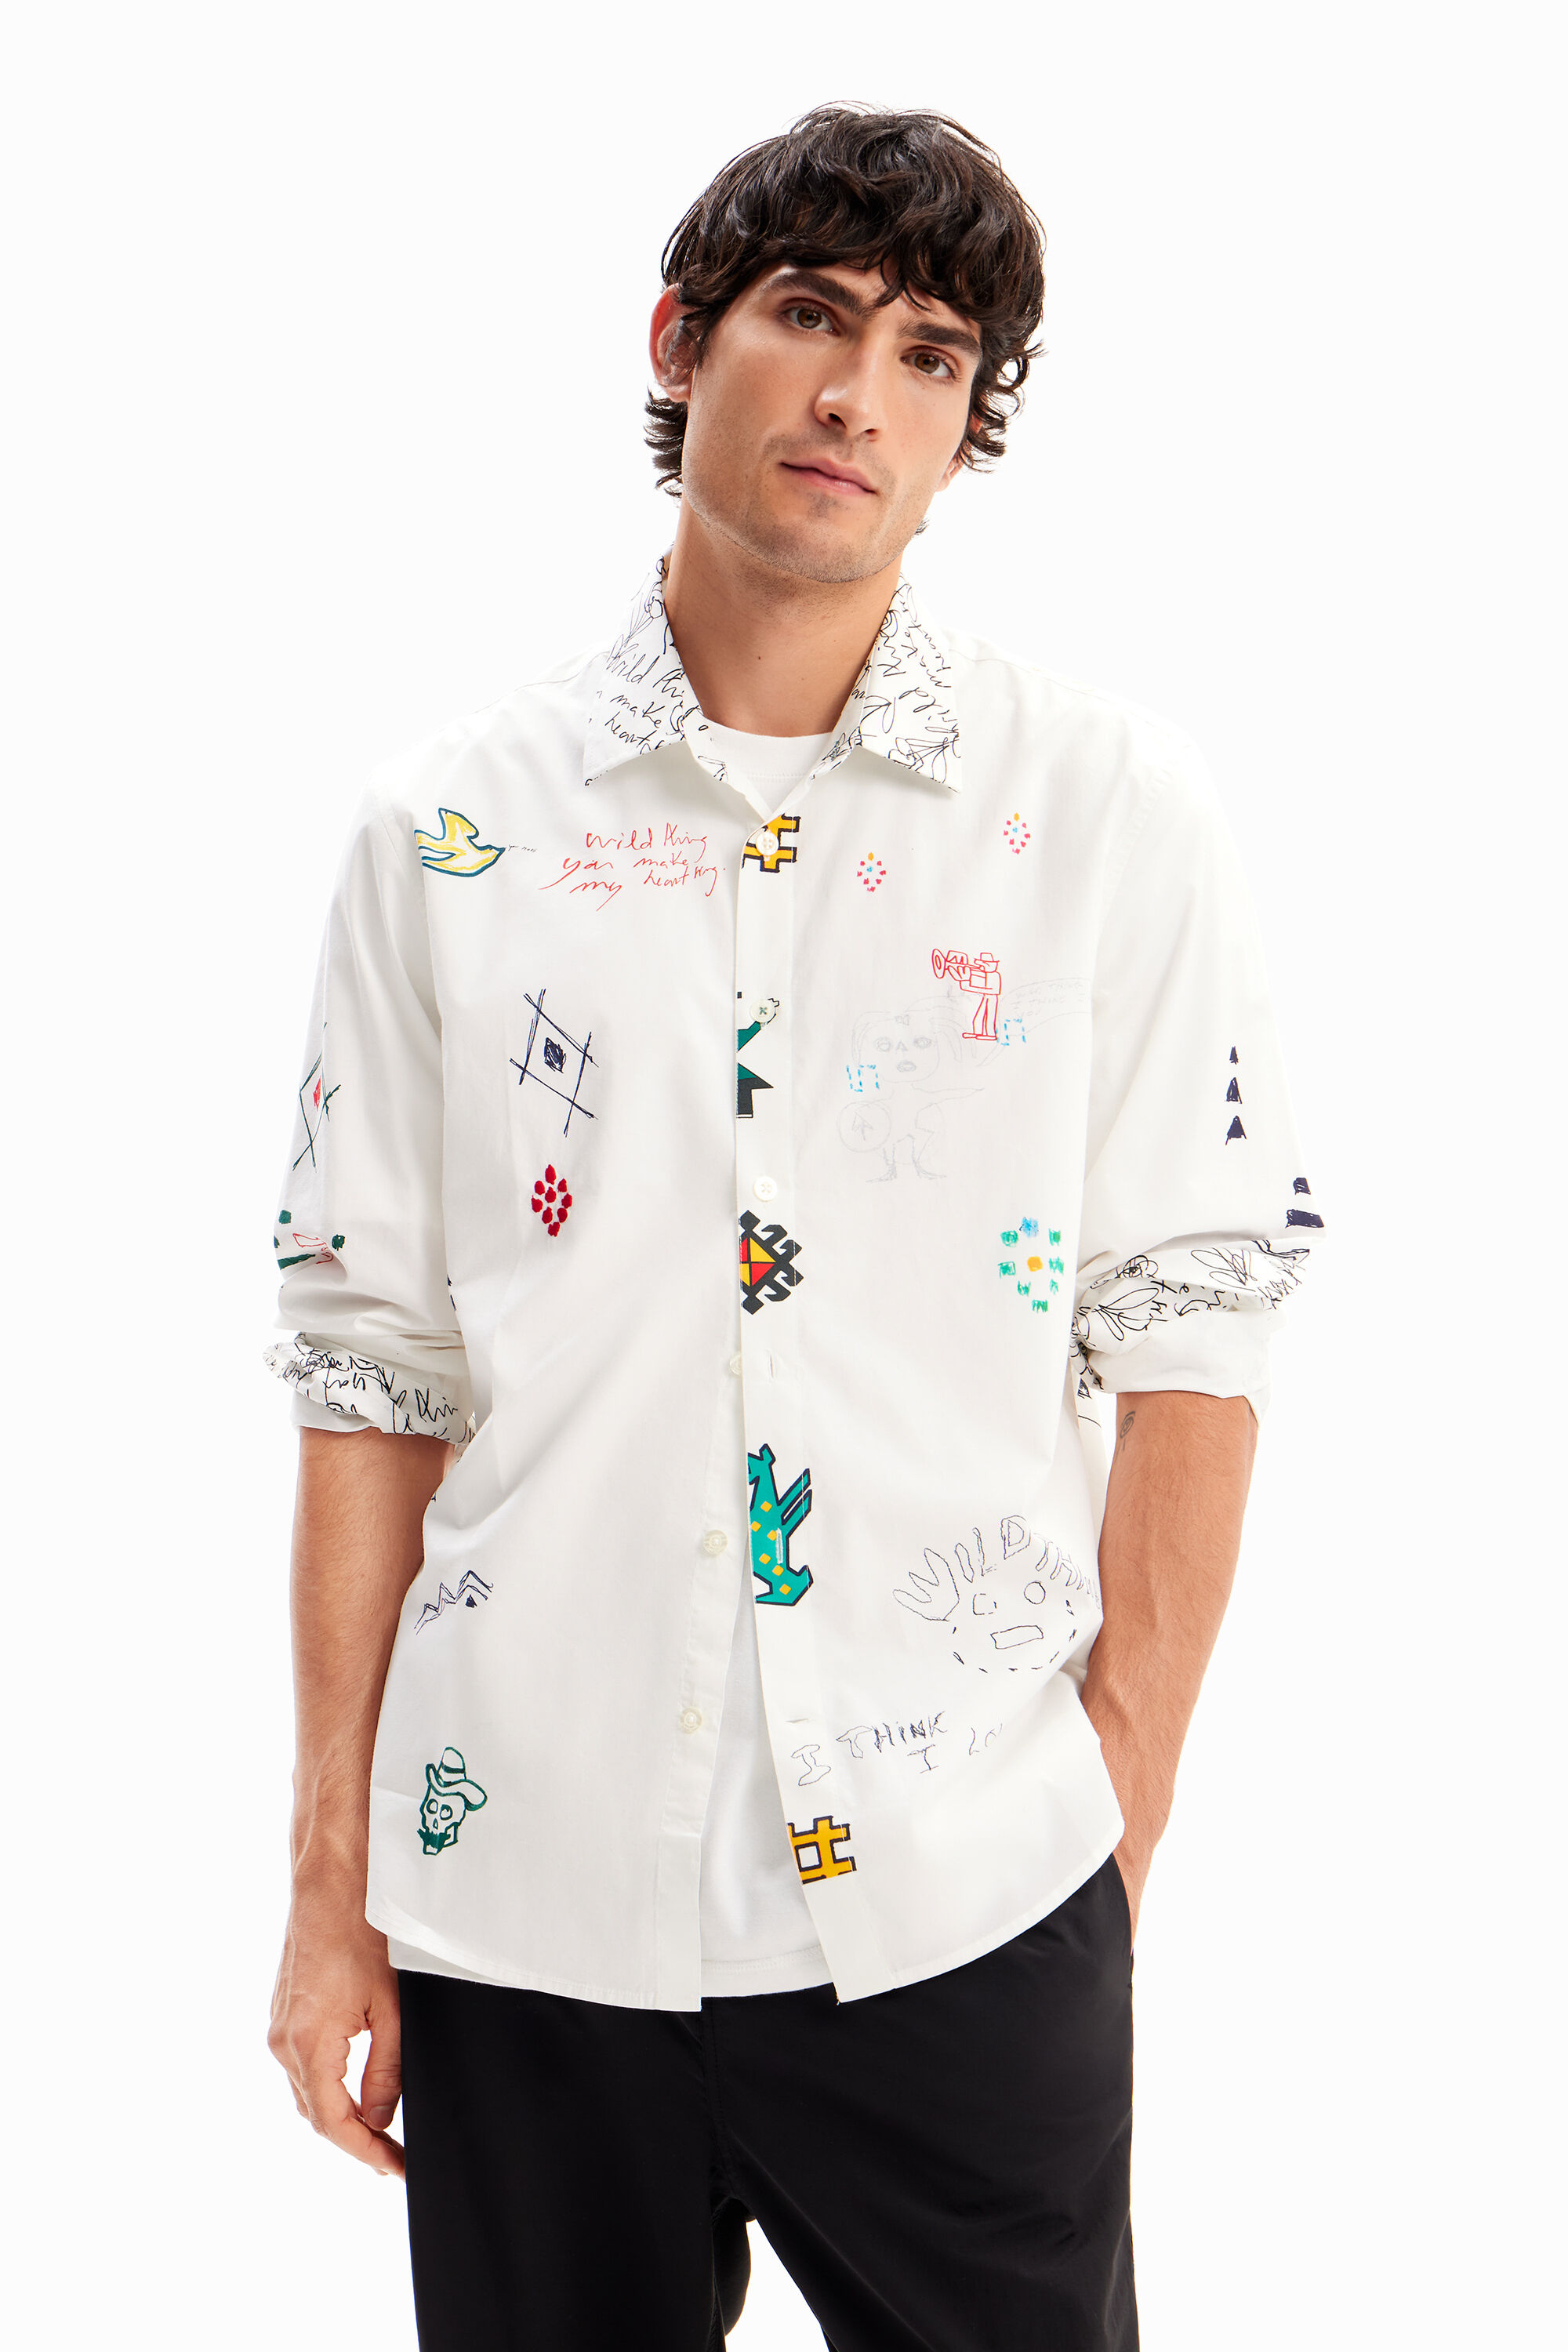 Illustrated message shirt - WHITE - XL